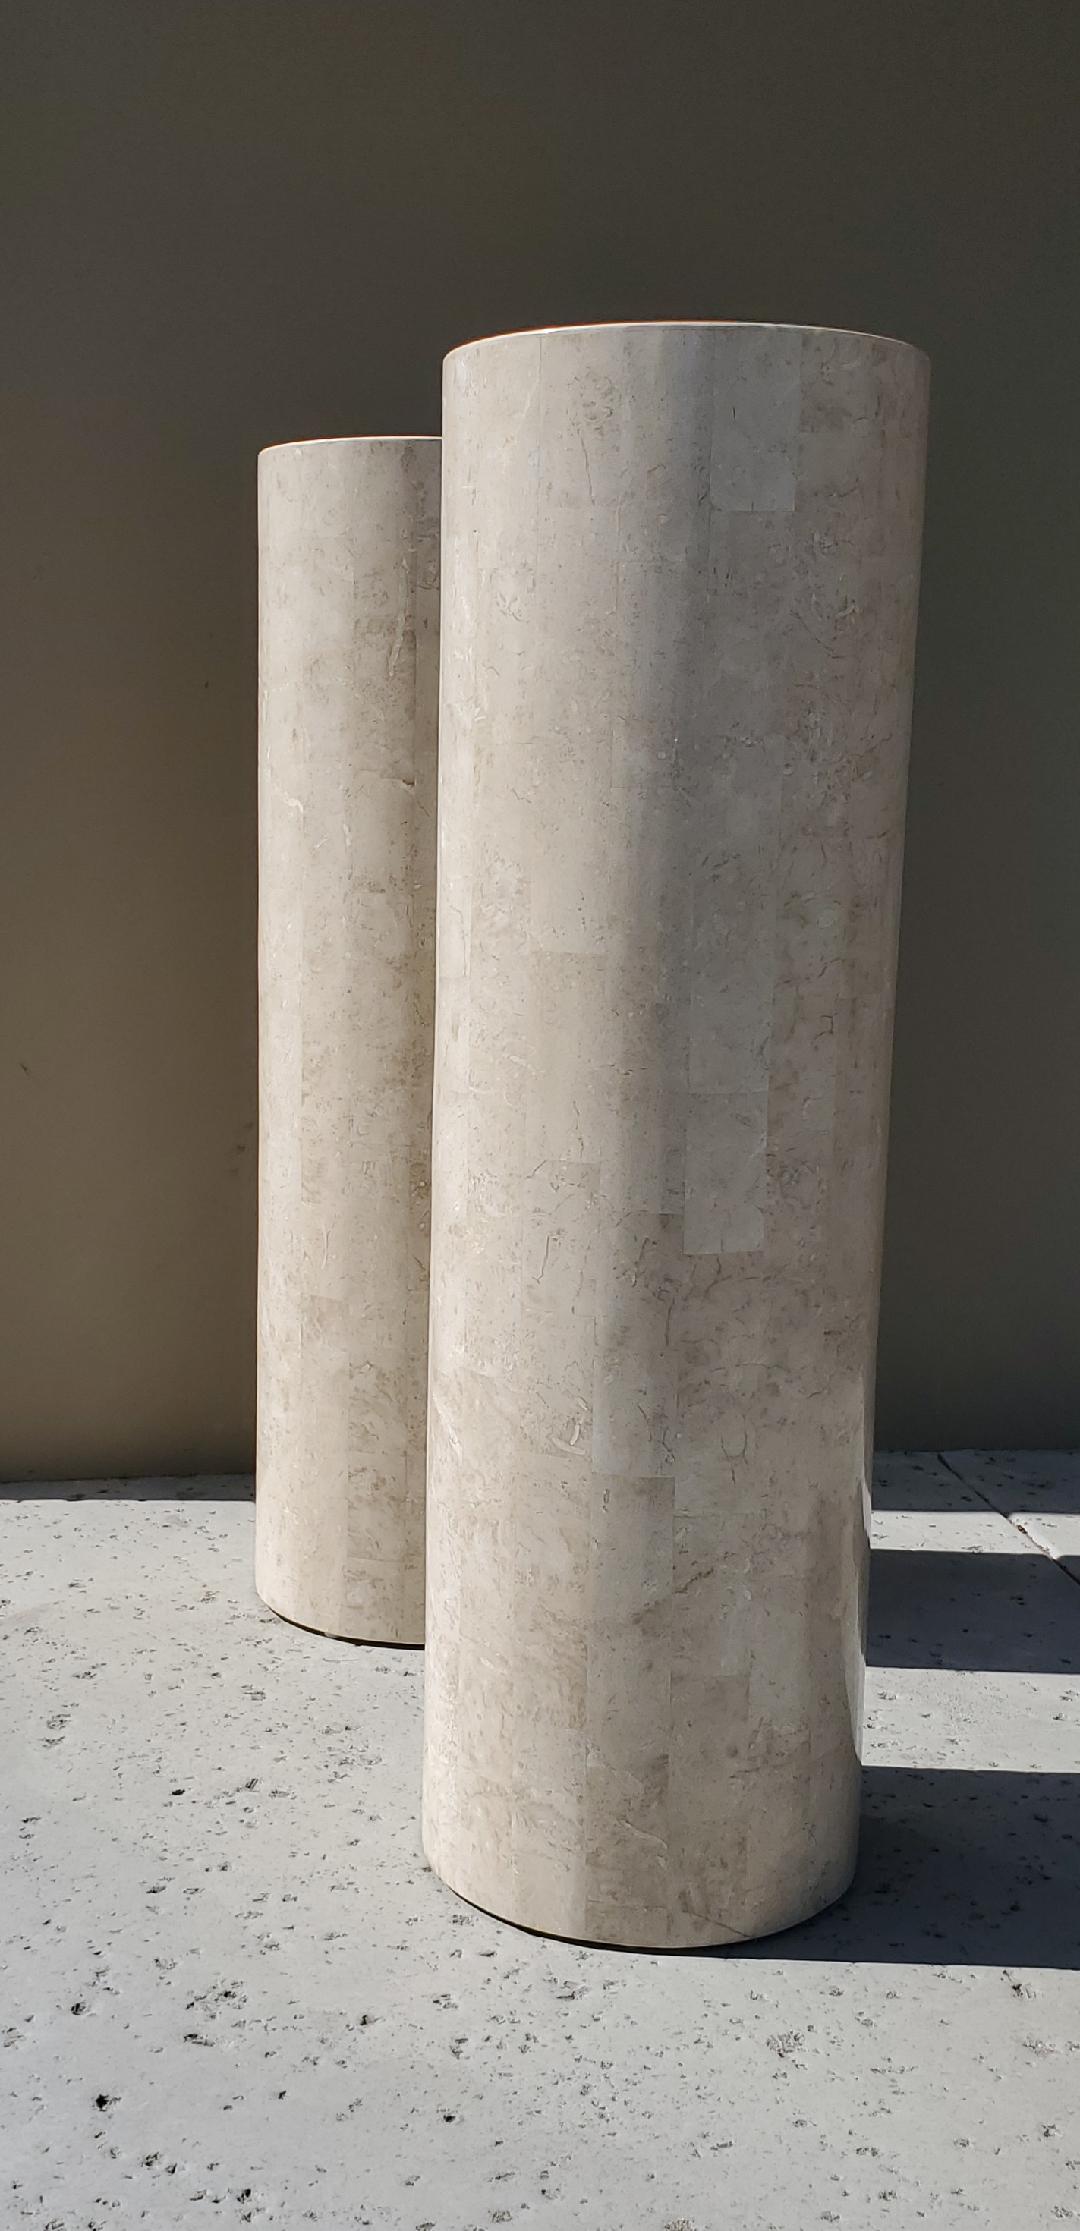 Marquis Collection of Beverly Hills, 1980s Round Tessellated Stone Pedestals 2 6